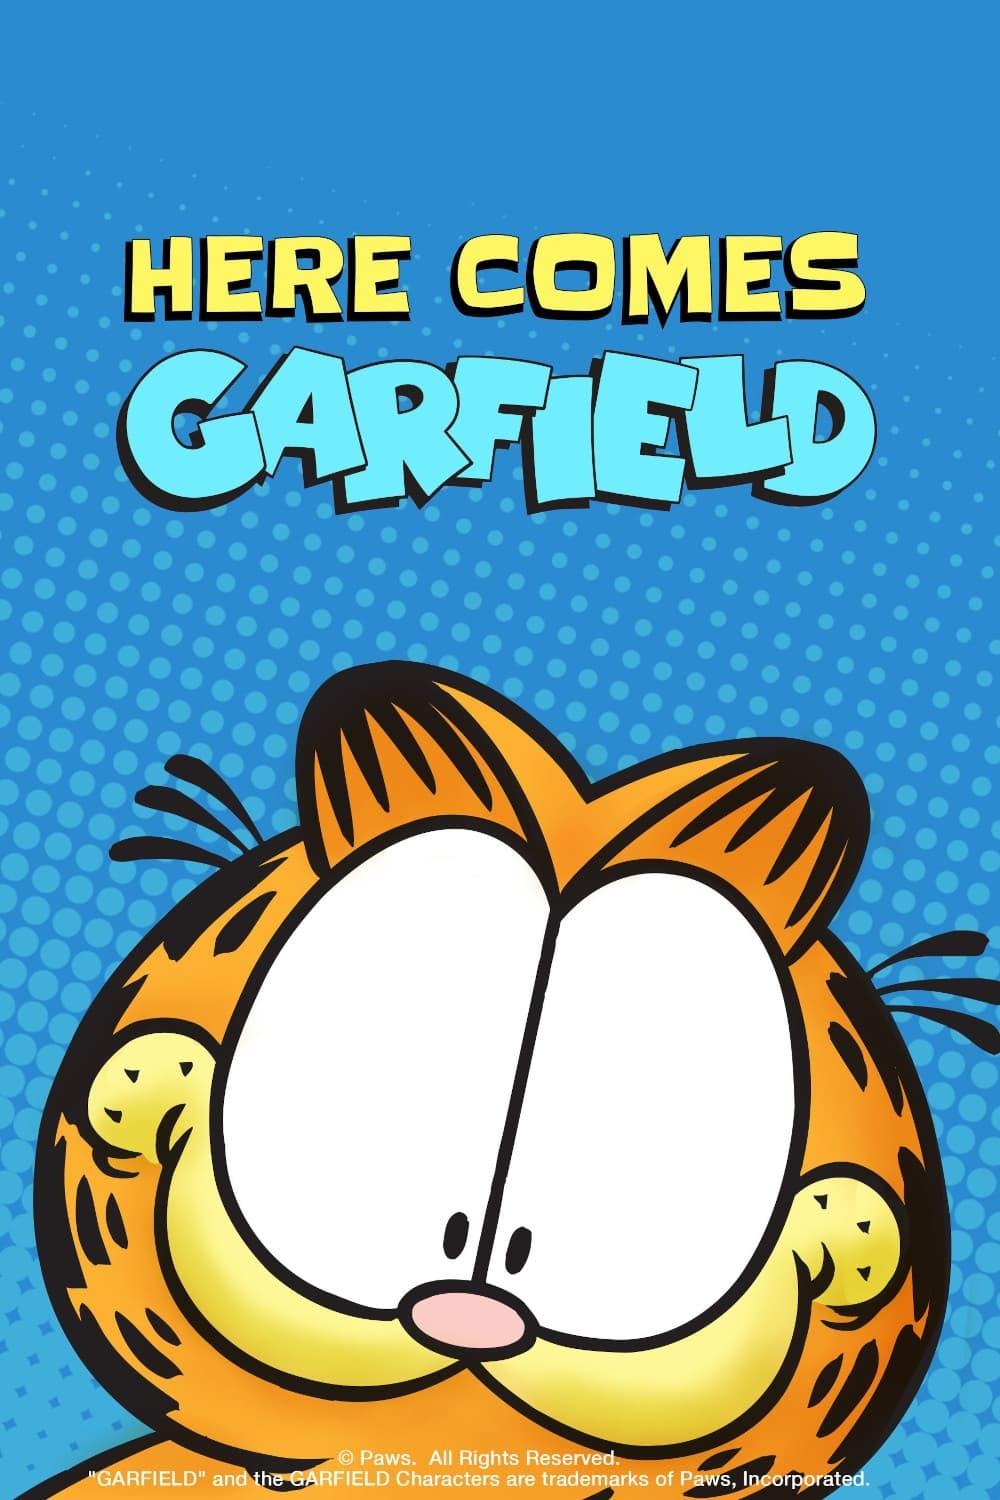 Here Comes Garfield poster